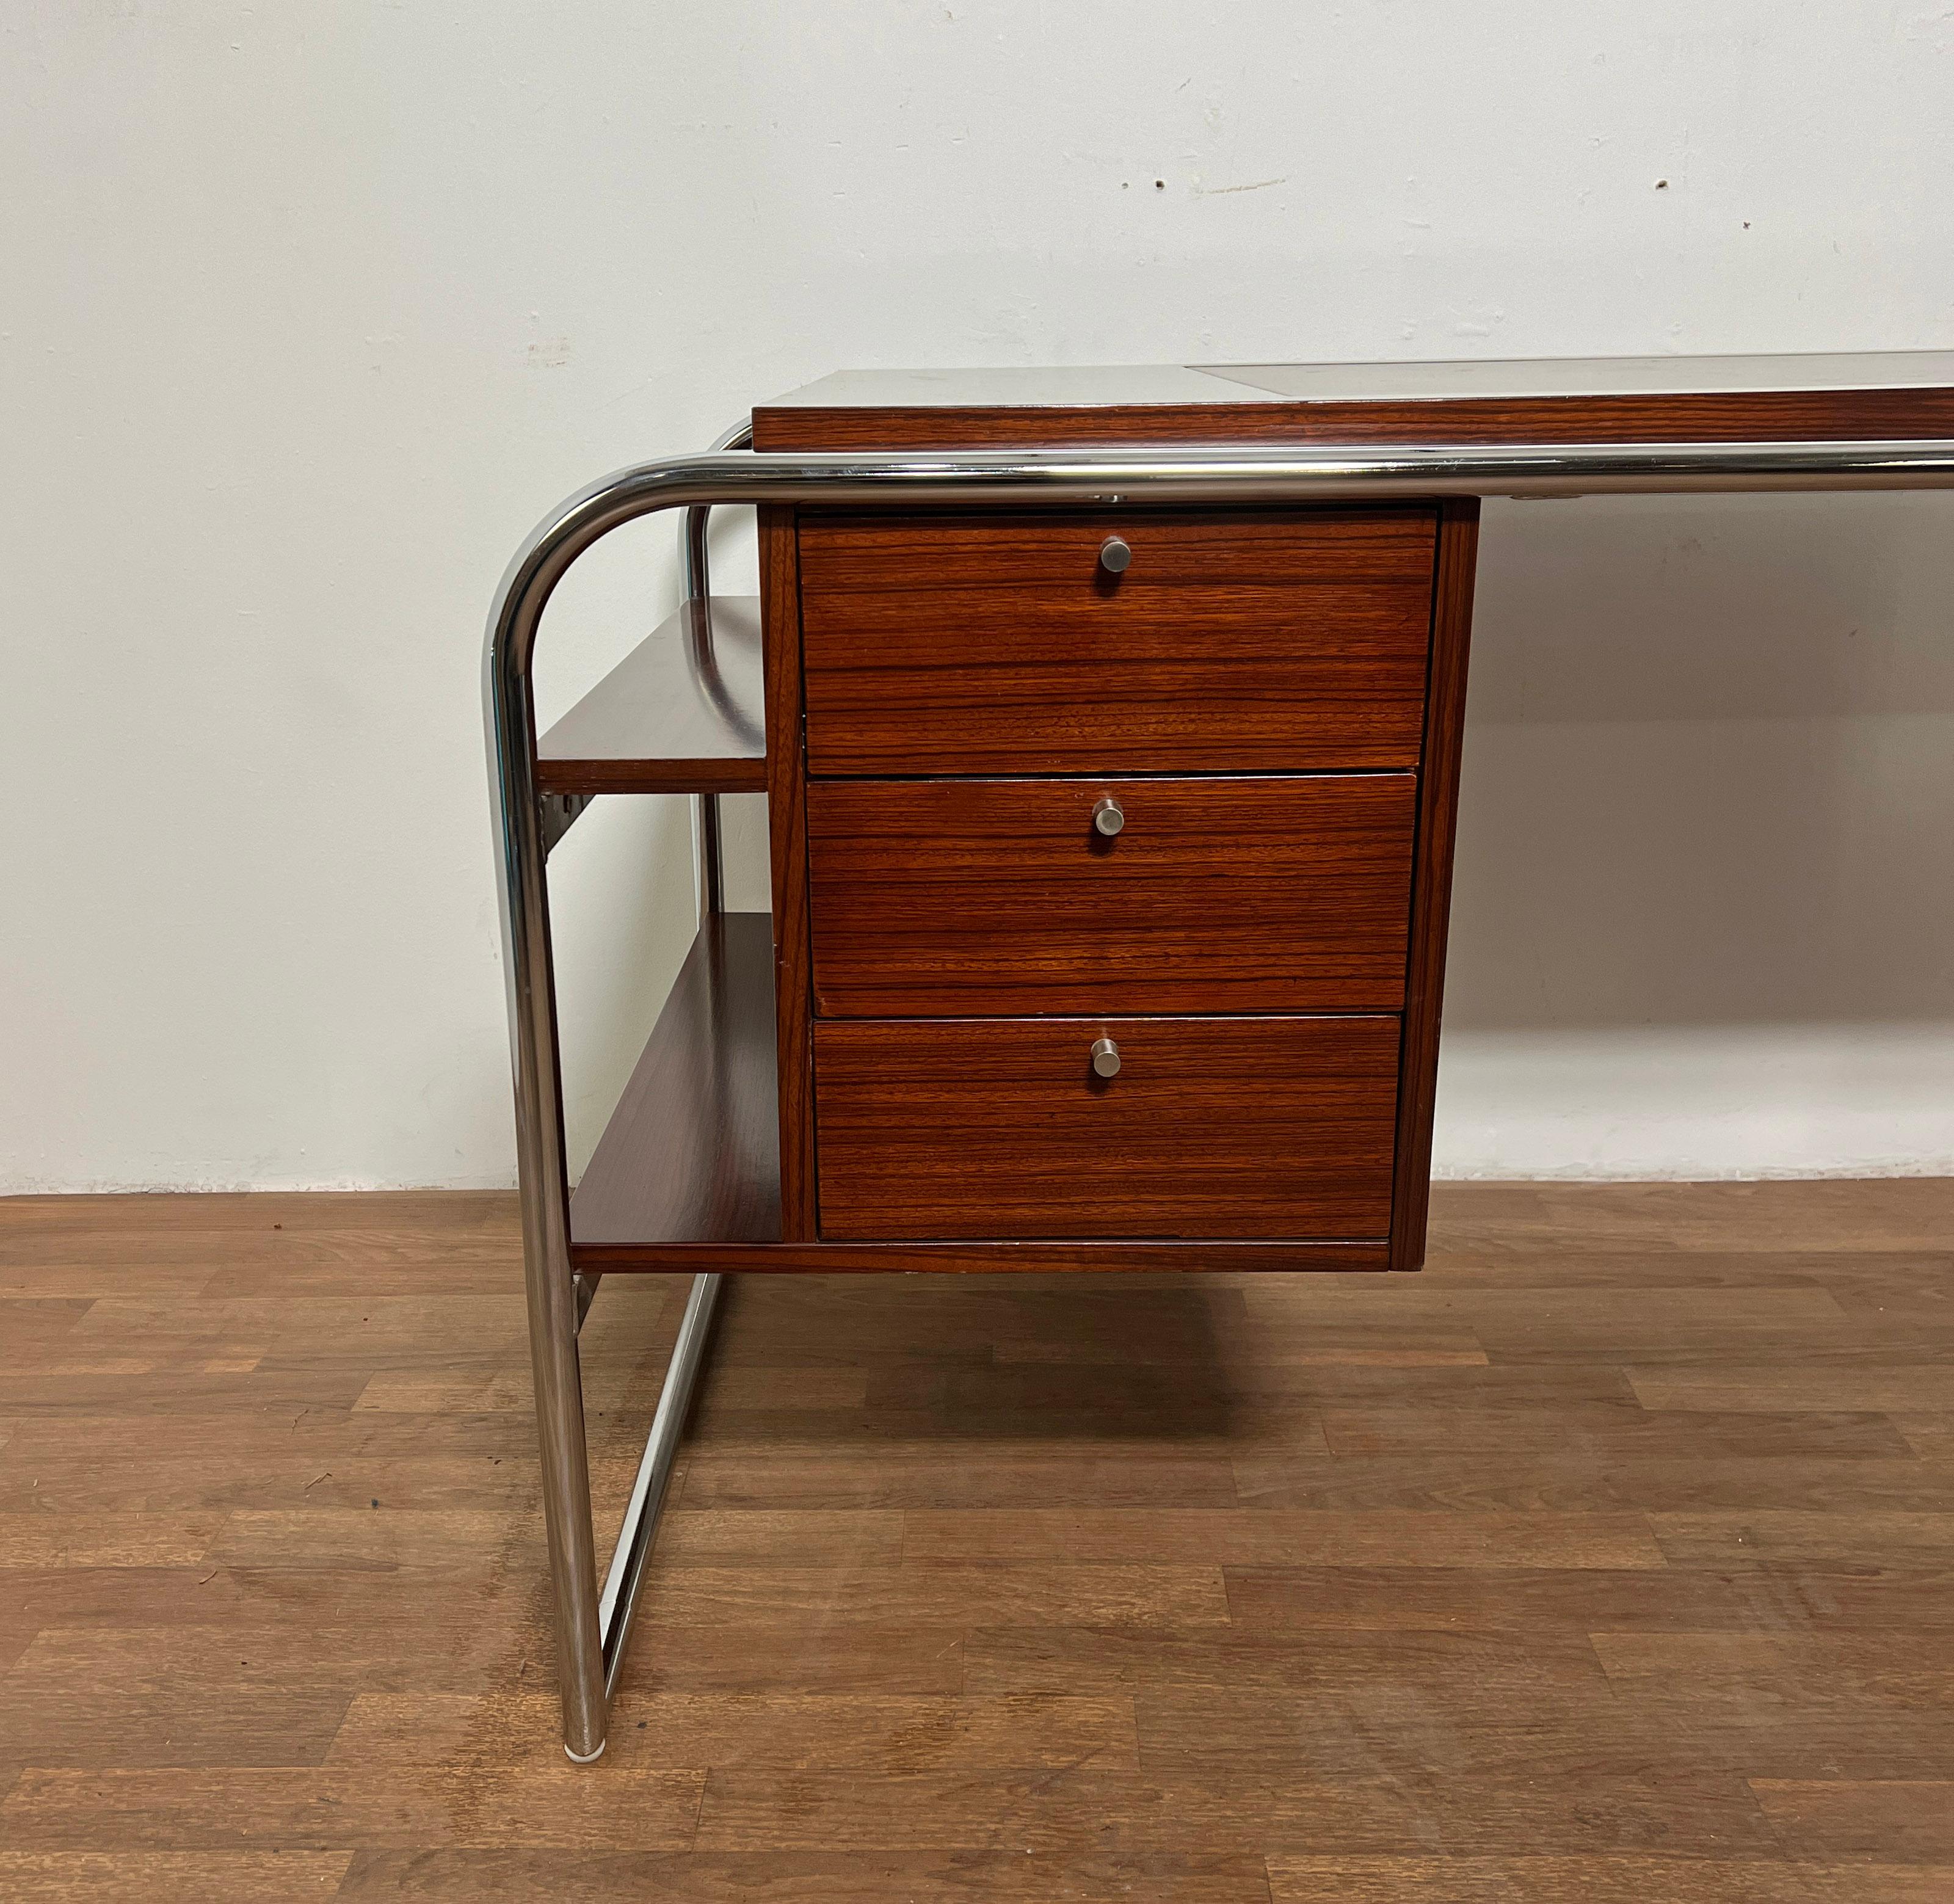 Chinese Ralph Lauren Bauhaus Inspired Desk in Rosewood, Chrome and Leather For Sale